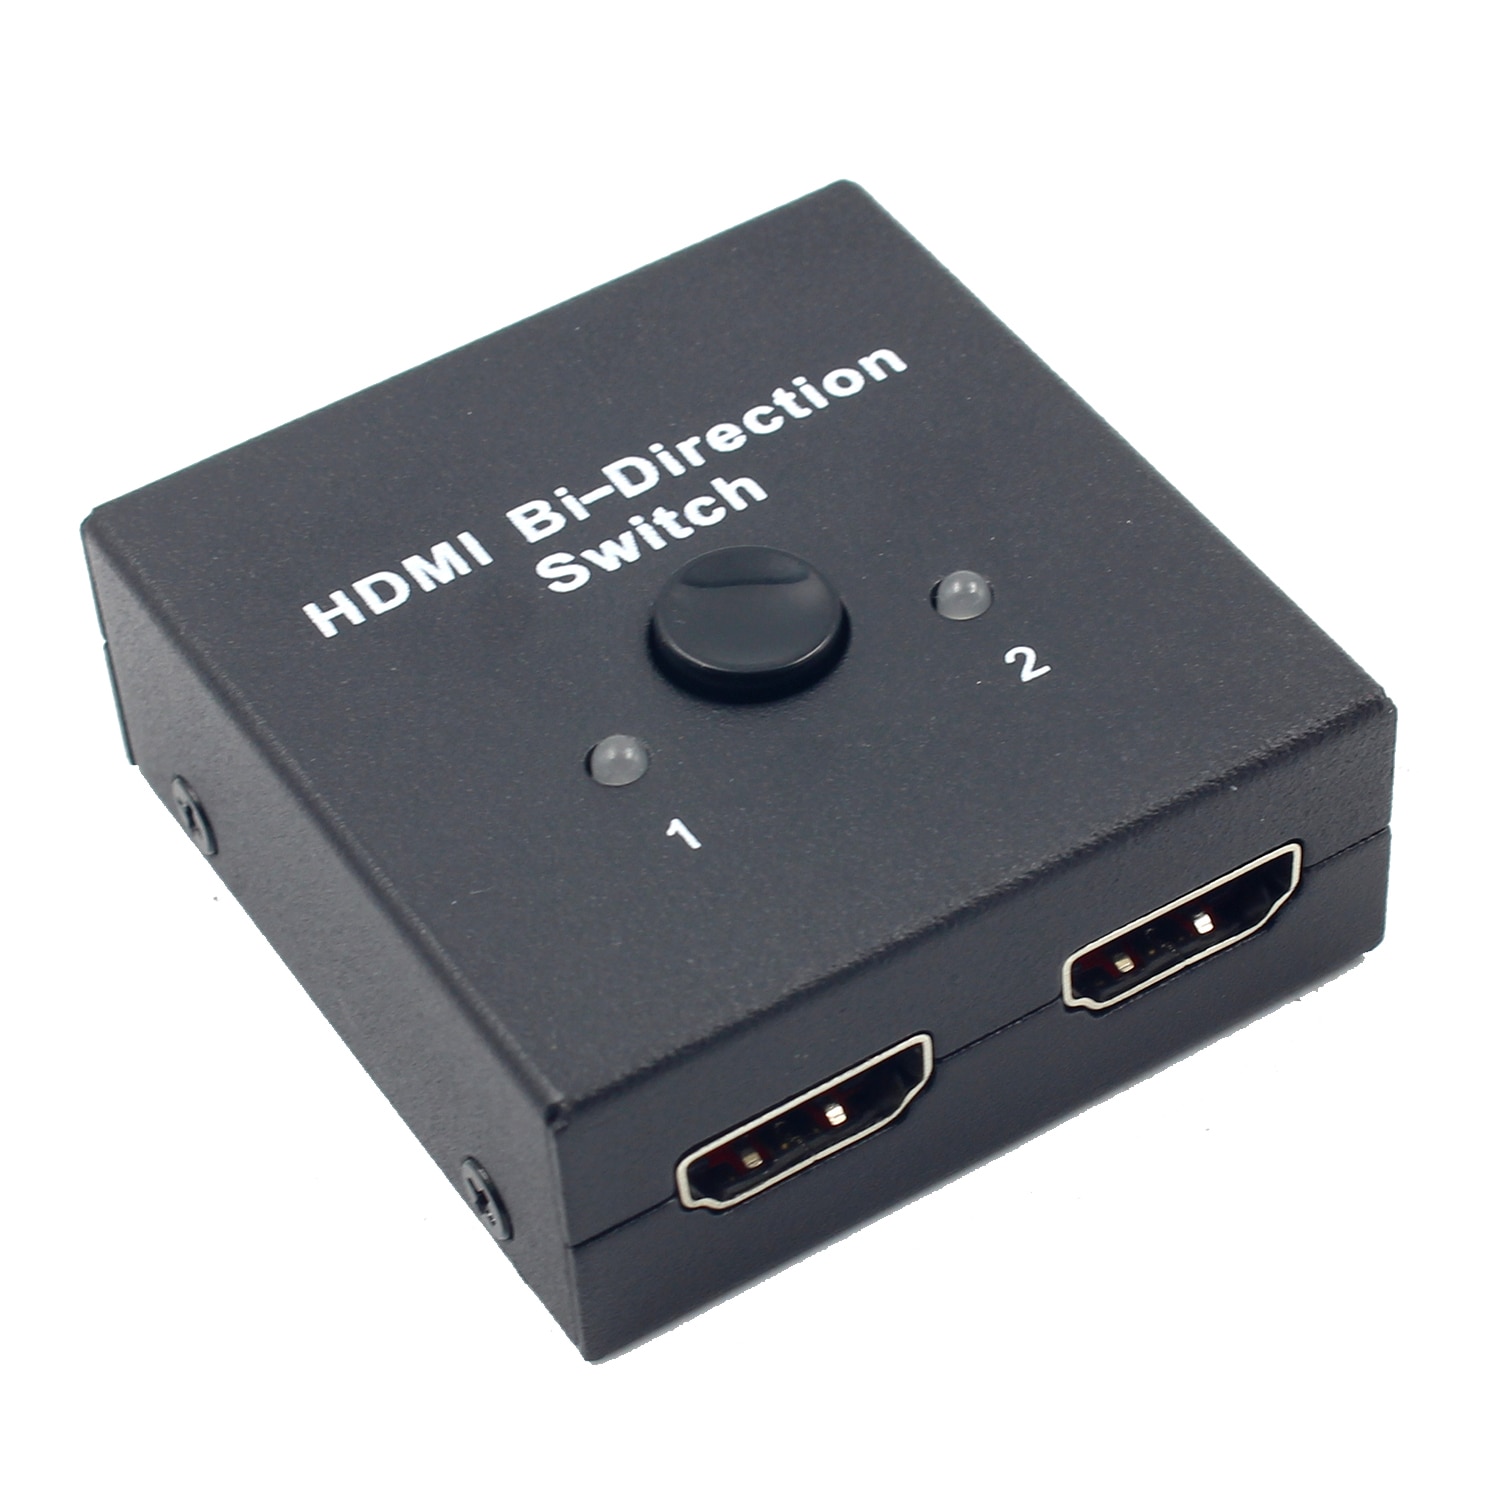 Bidirectionele 2 Hdmi Switcher 2 In 1 Out Of 1 In 2 Out Video Splitter Converter 1080P 3D-SCLL